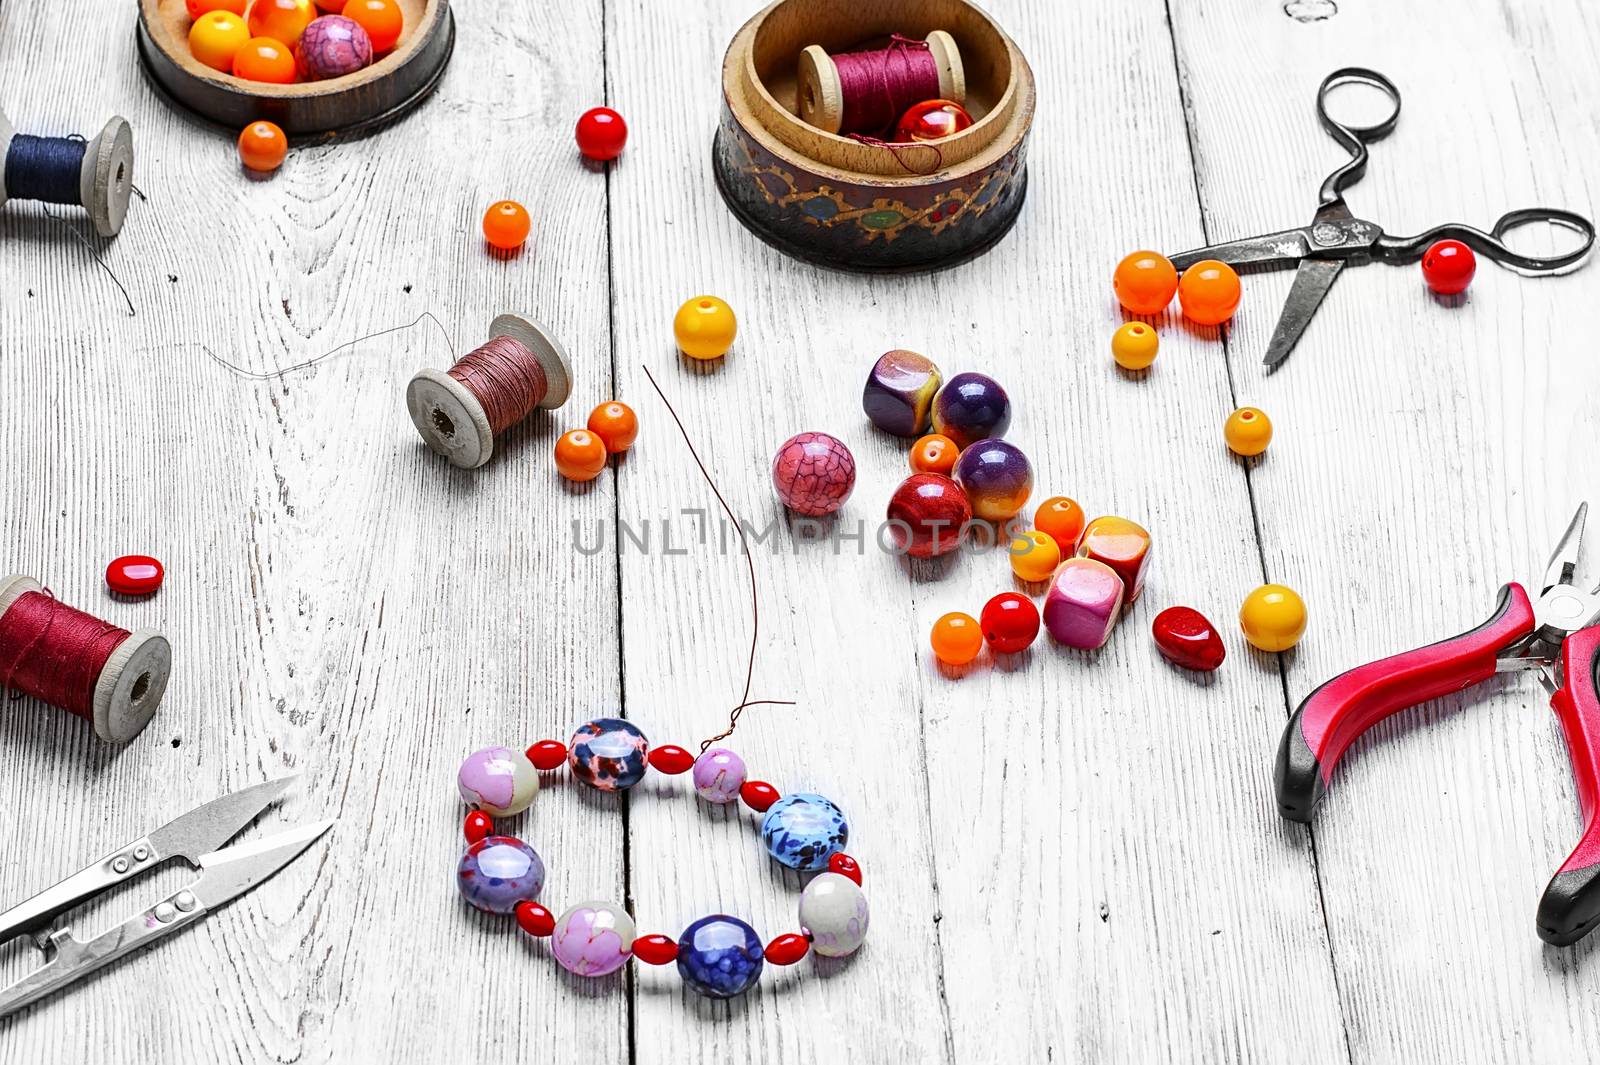 Range of decorative beads for bracelet and tool